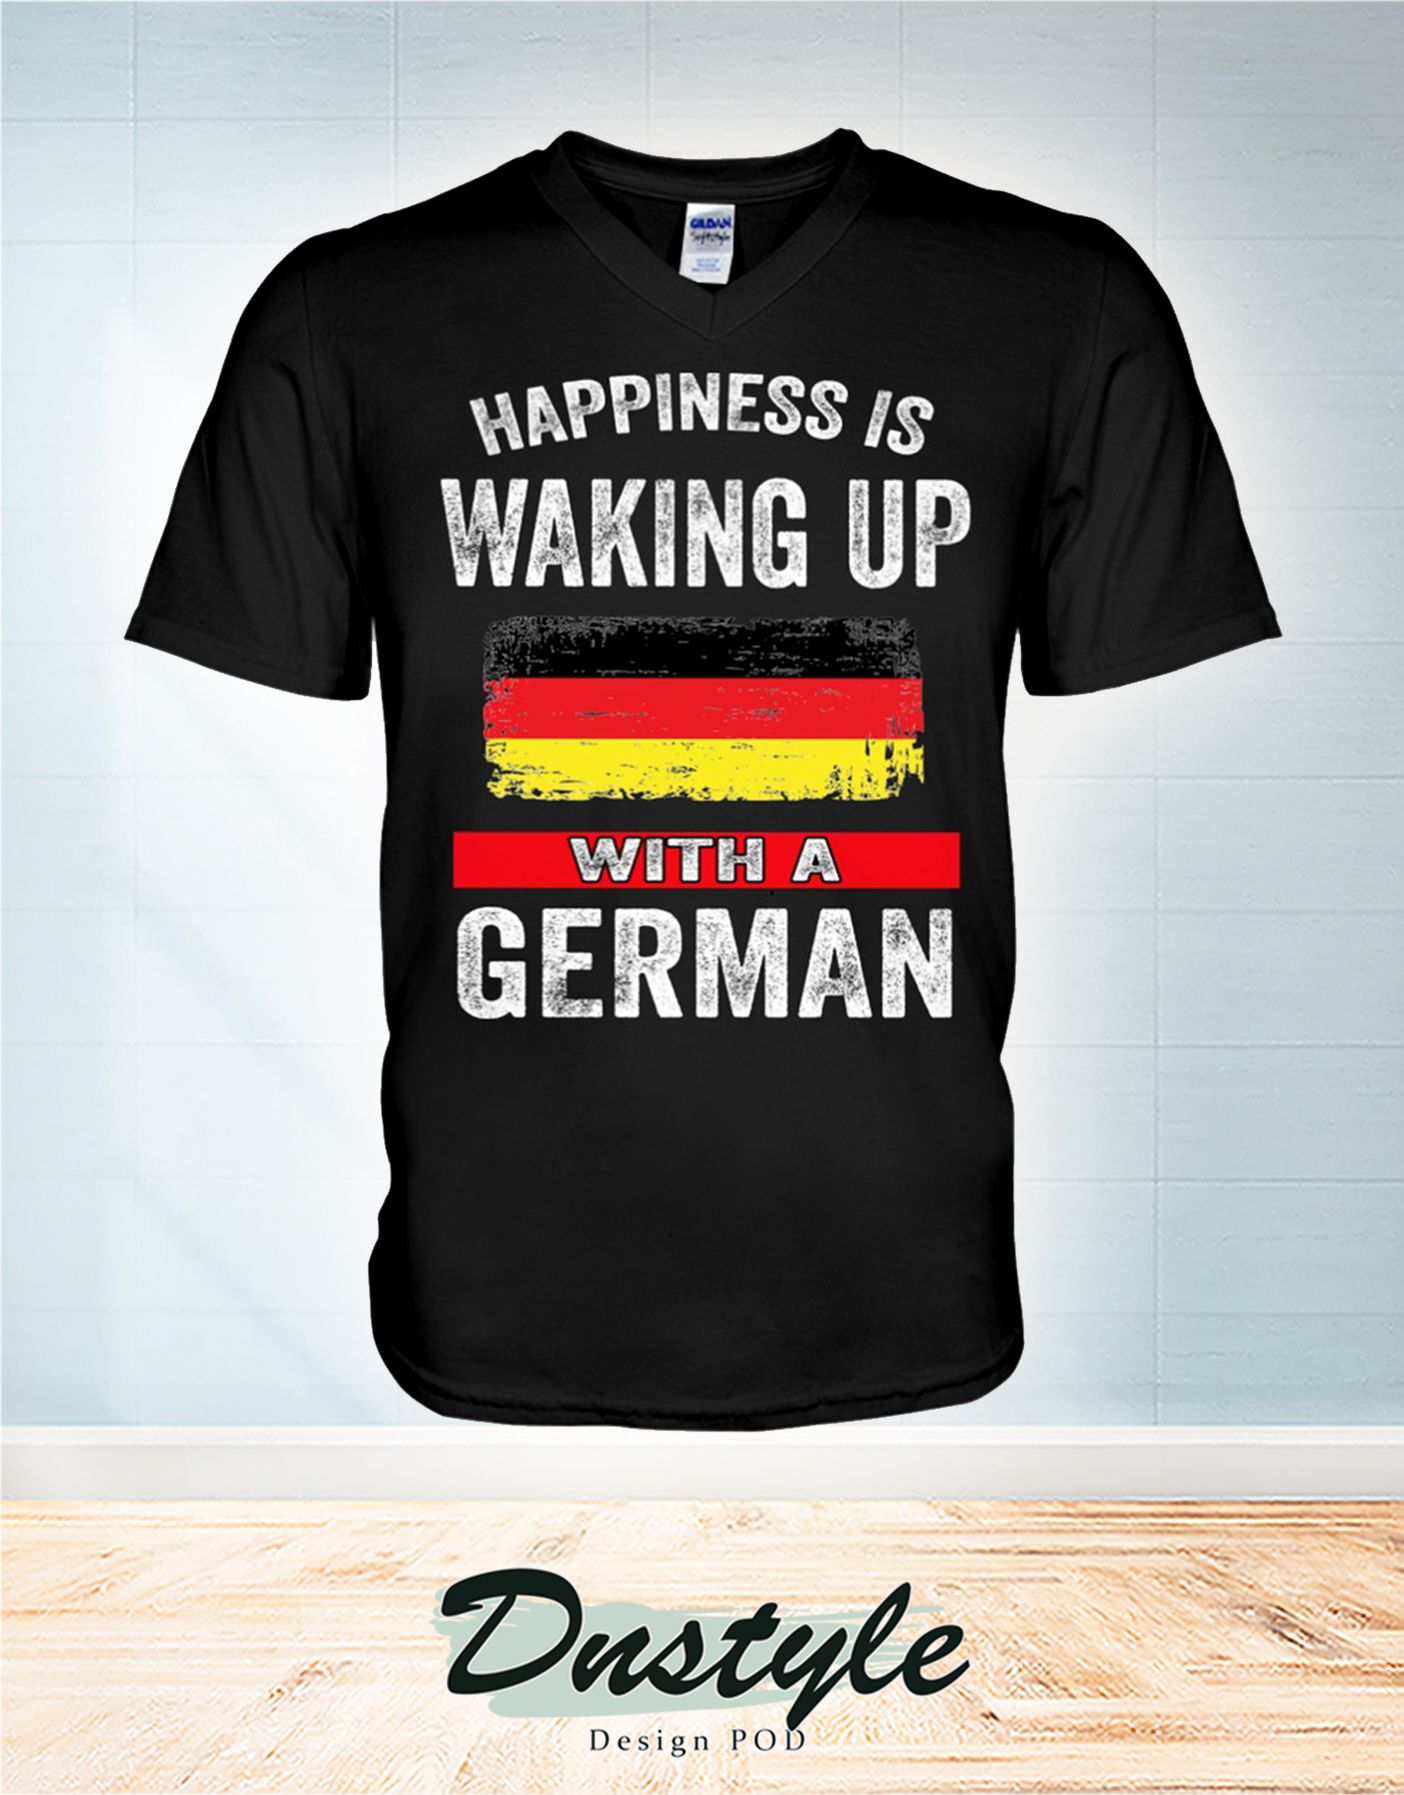 Happiness is waking up with a German t-shirt